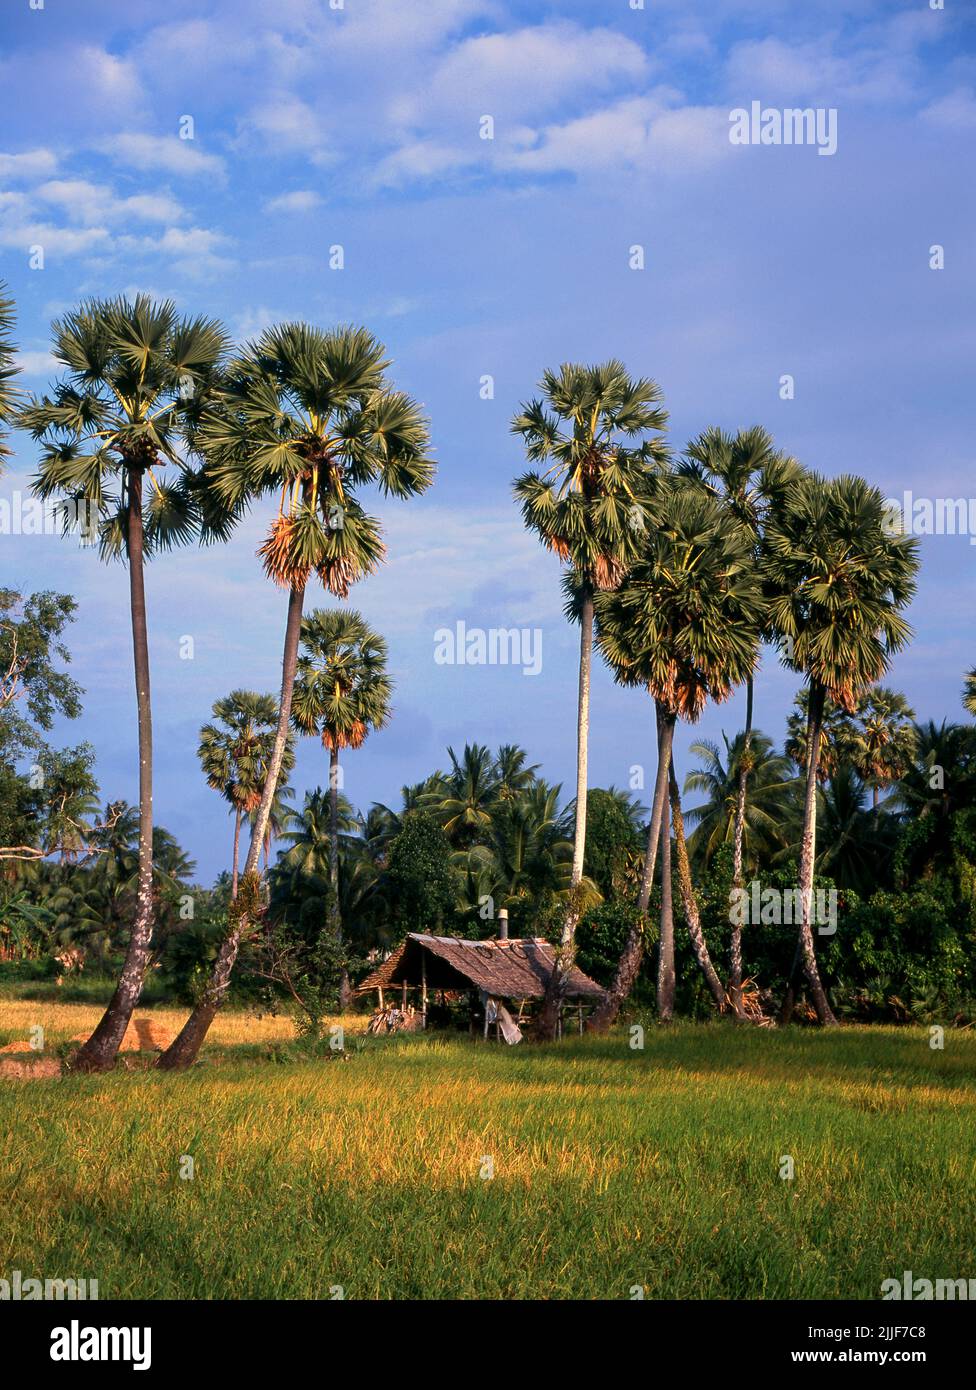 Thailand: A farmworkers' hut used for shelter during the hottest parts of the day, set among the ricefields and toddy palms, Kamphaeng Phet Province. Stock Photo